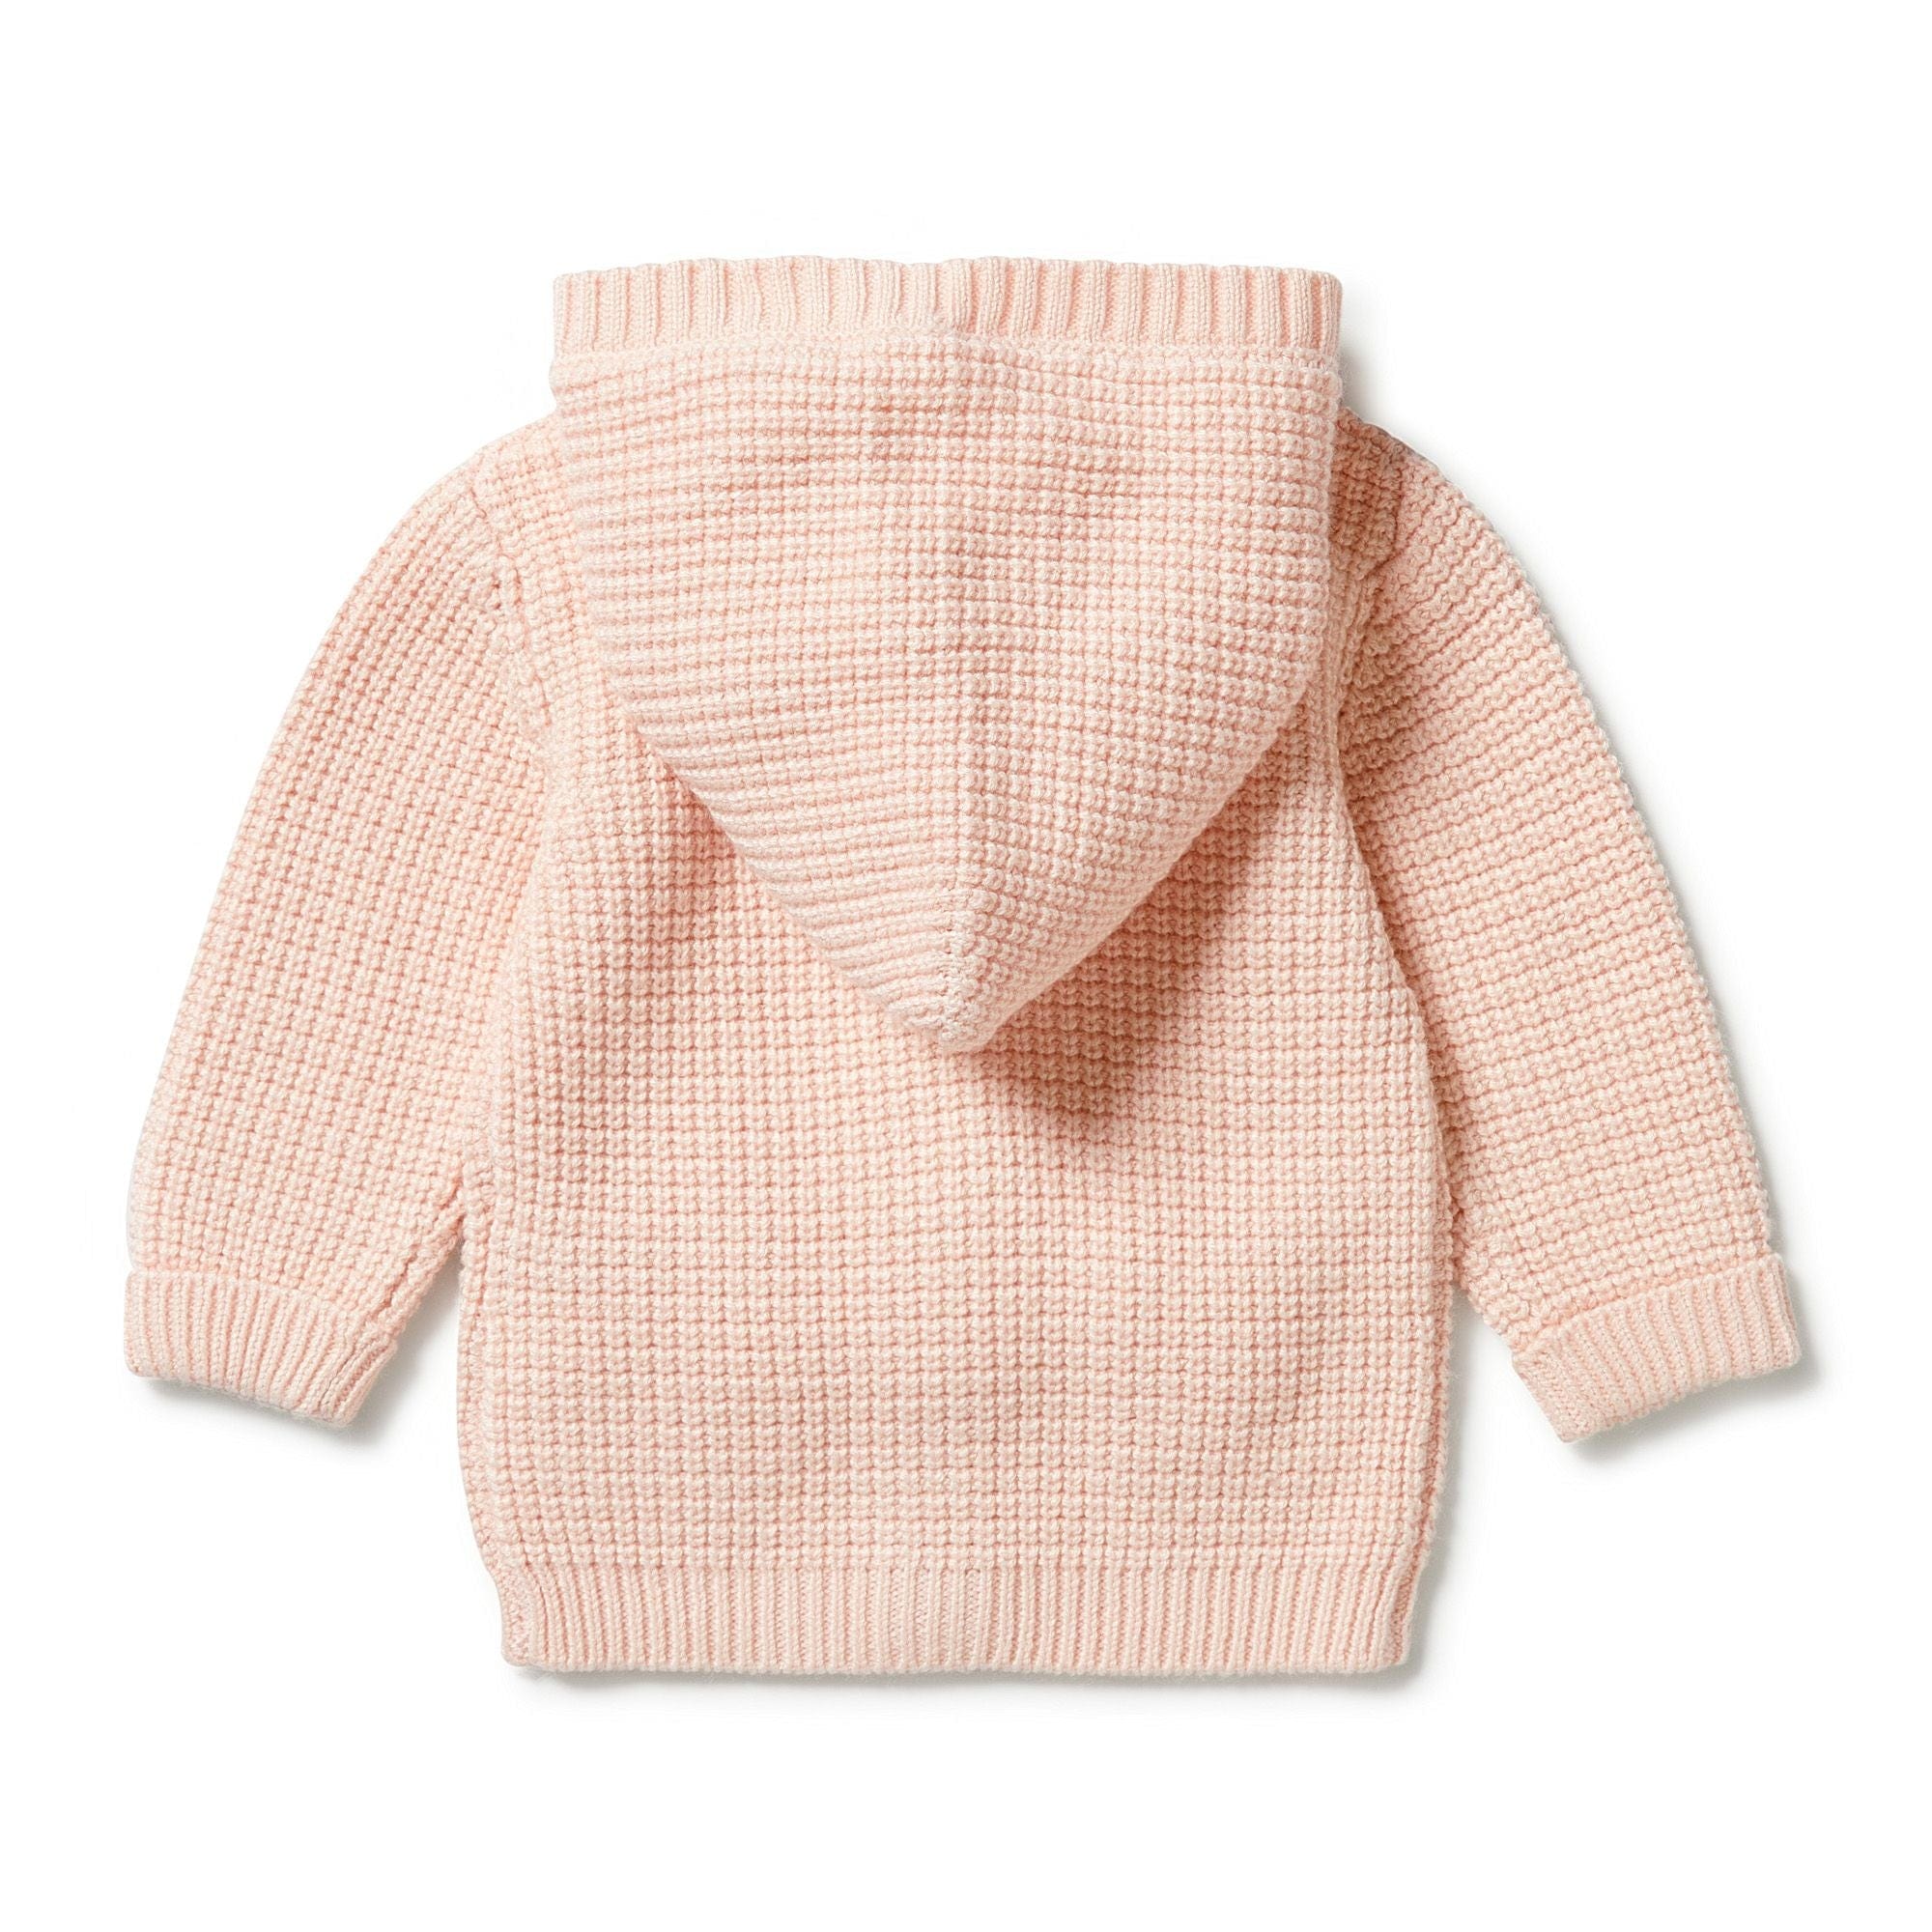 Wilson & Frenchy Girls Jacket Knitted Button Jacket - Blush